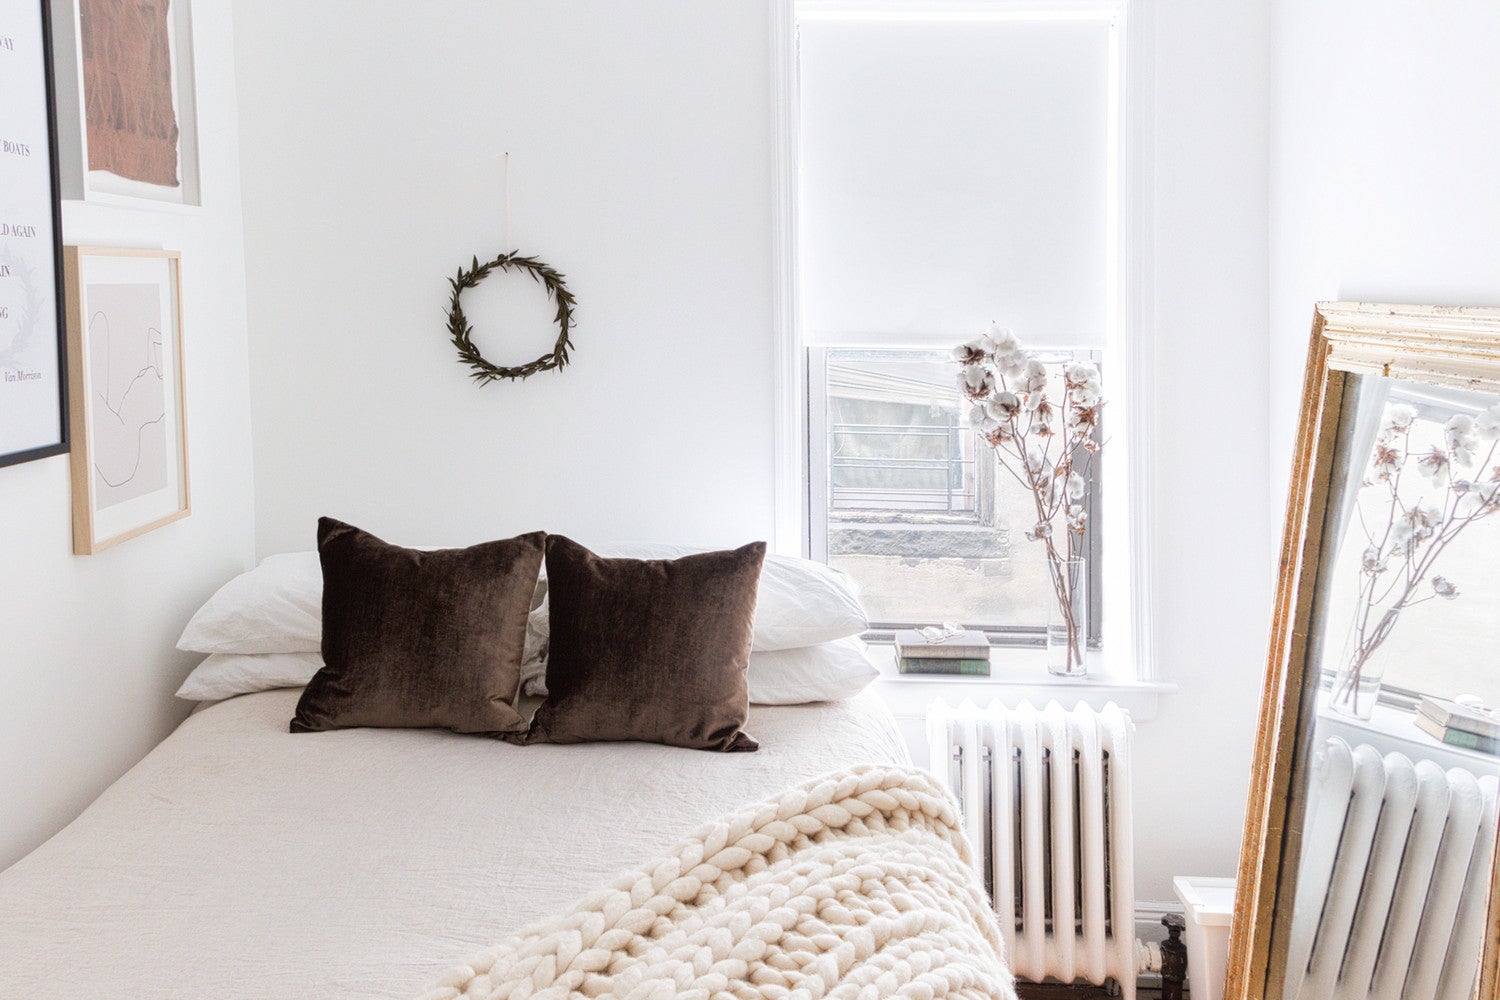 All the Etsy Shopping Inspo You Need, Courtesy of This Brooklyn Home